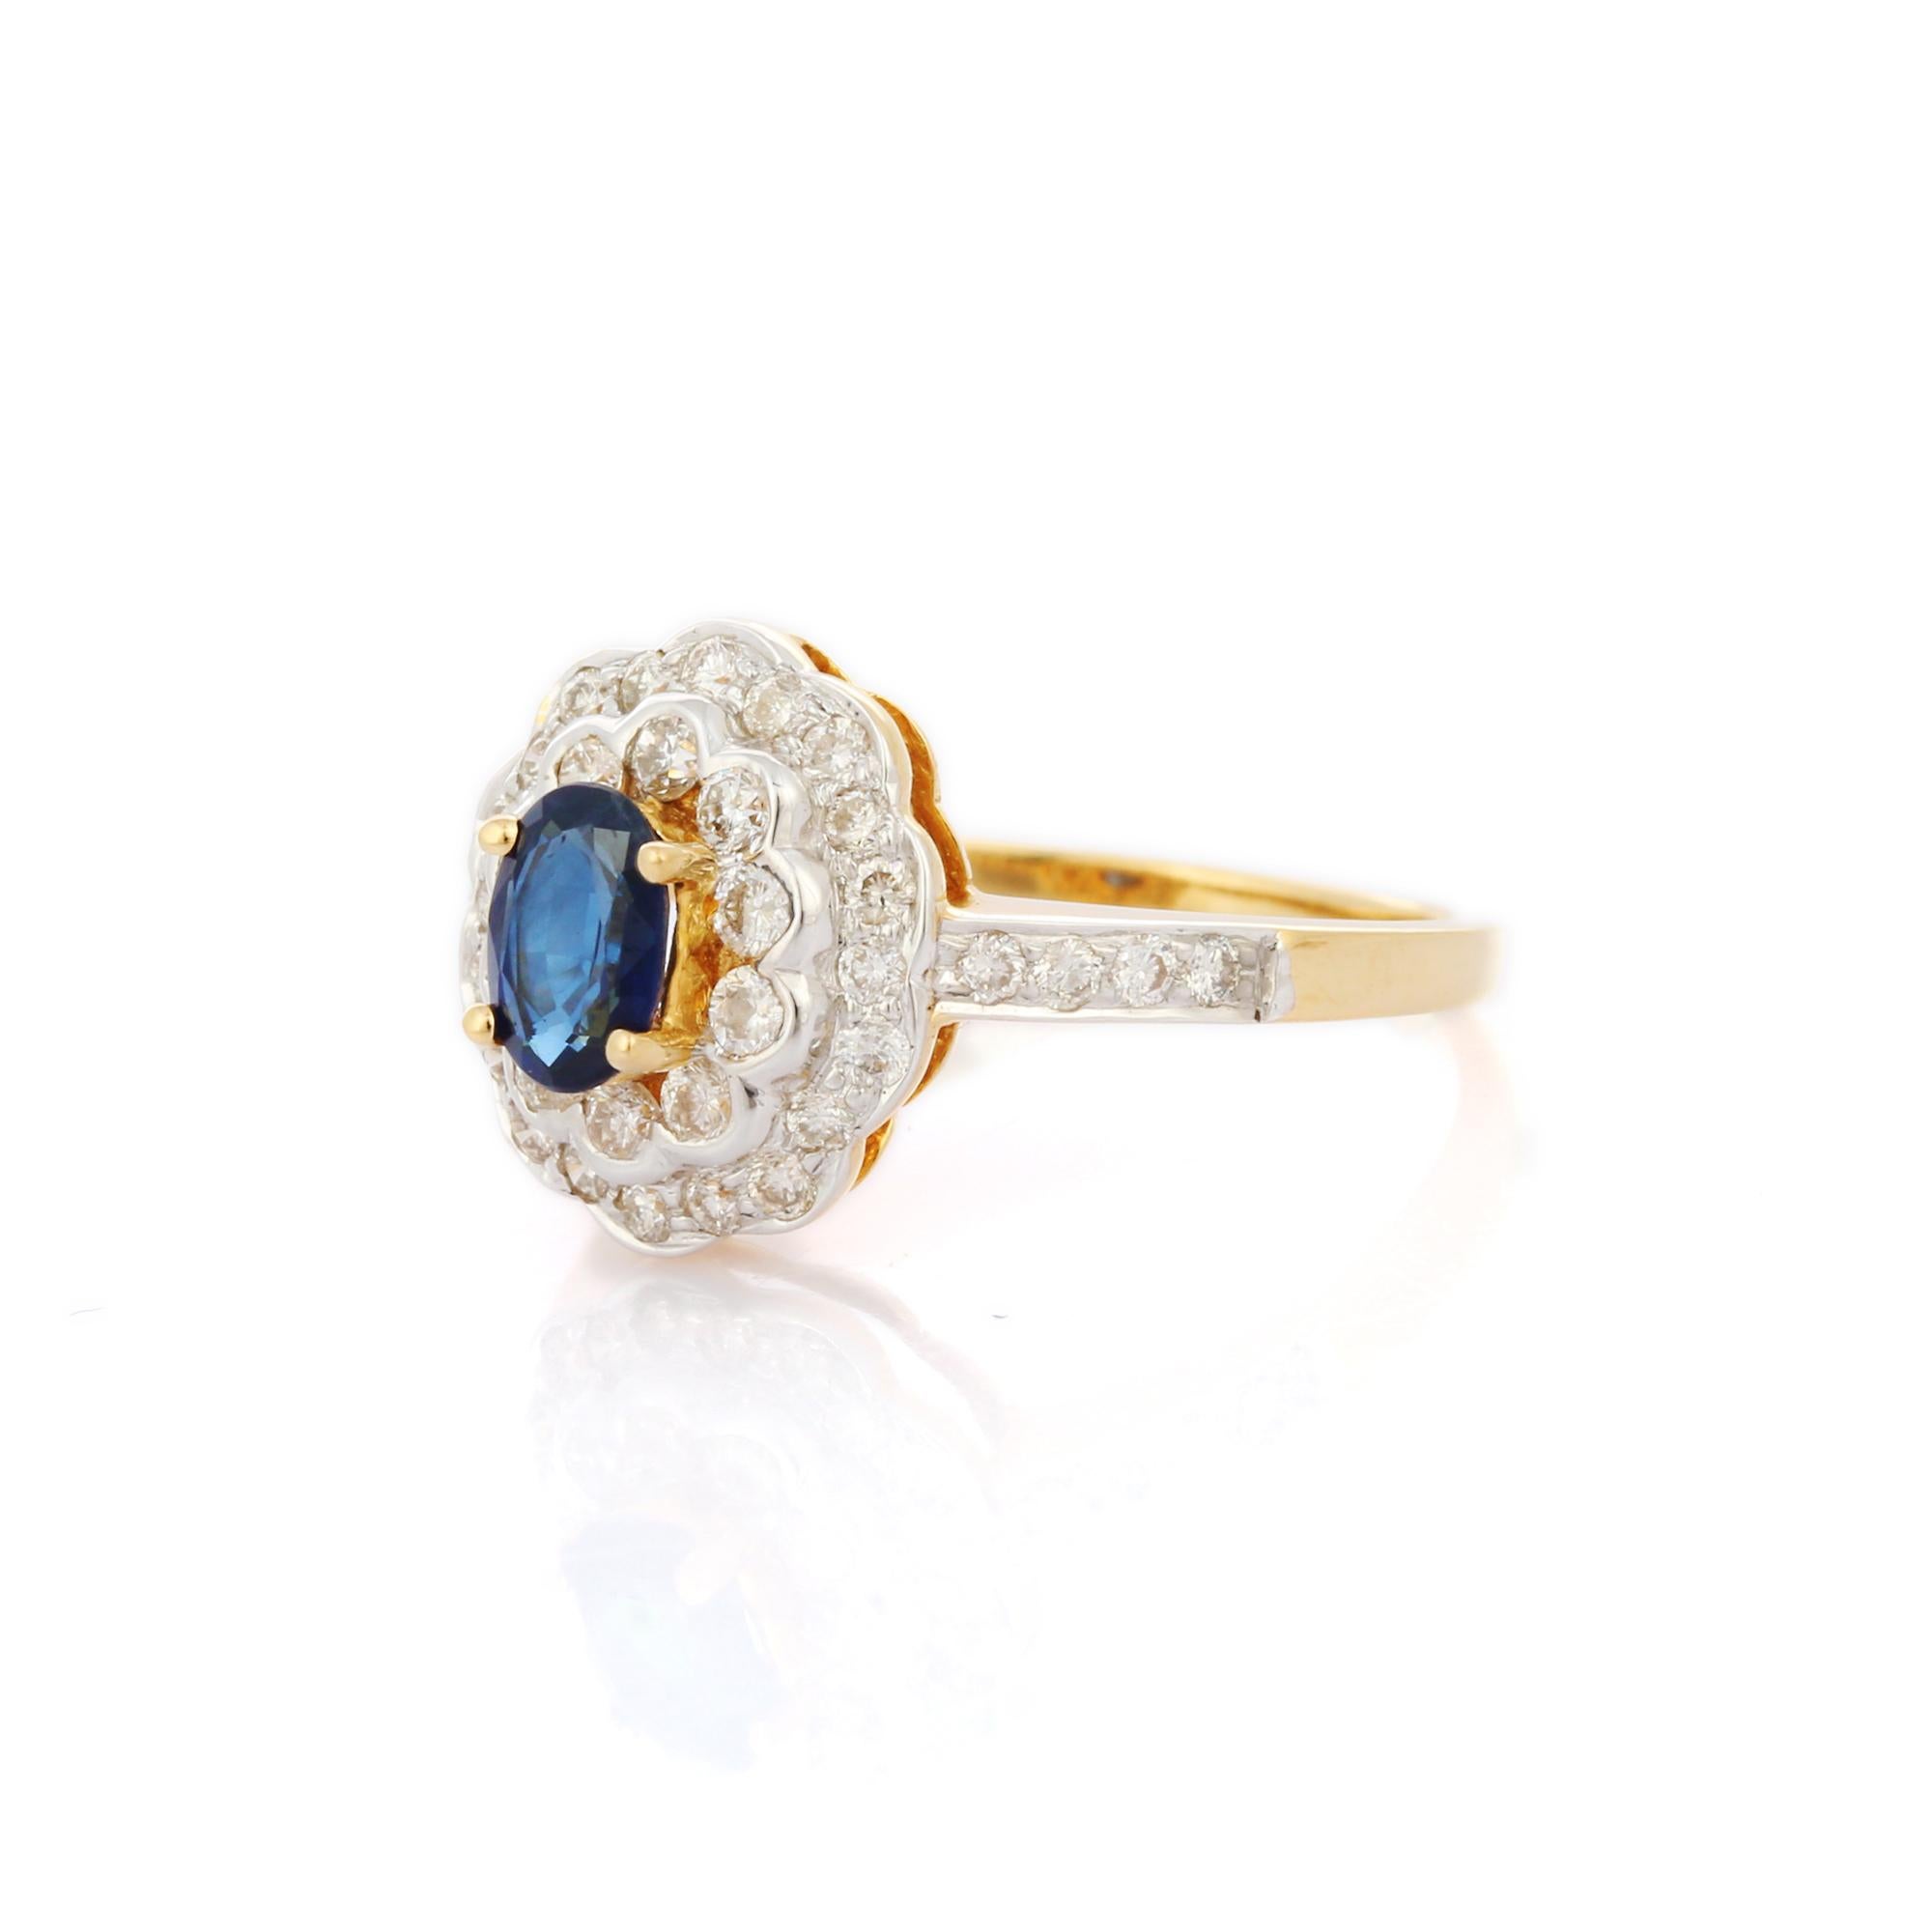 For Sale:  Big Floral Blue Sapphire Cocktail Ring with Inlaid Diamonds in 18K Yellow Gold 3